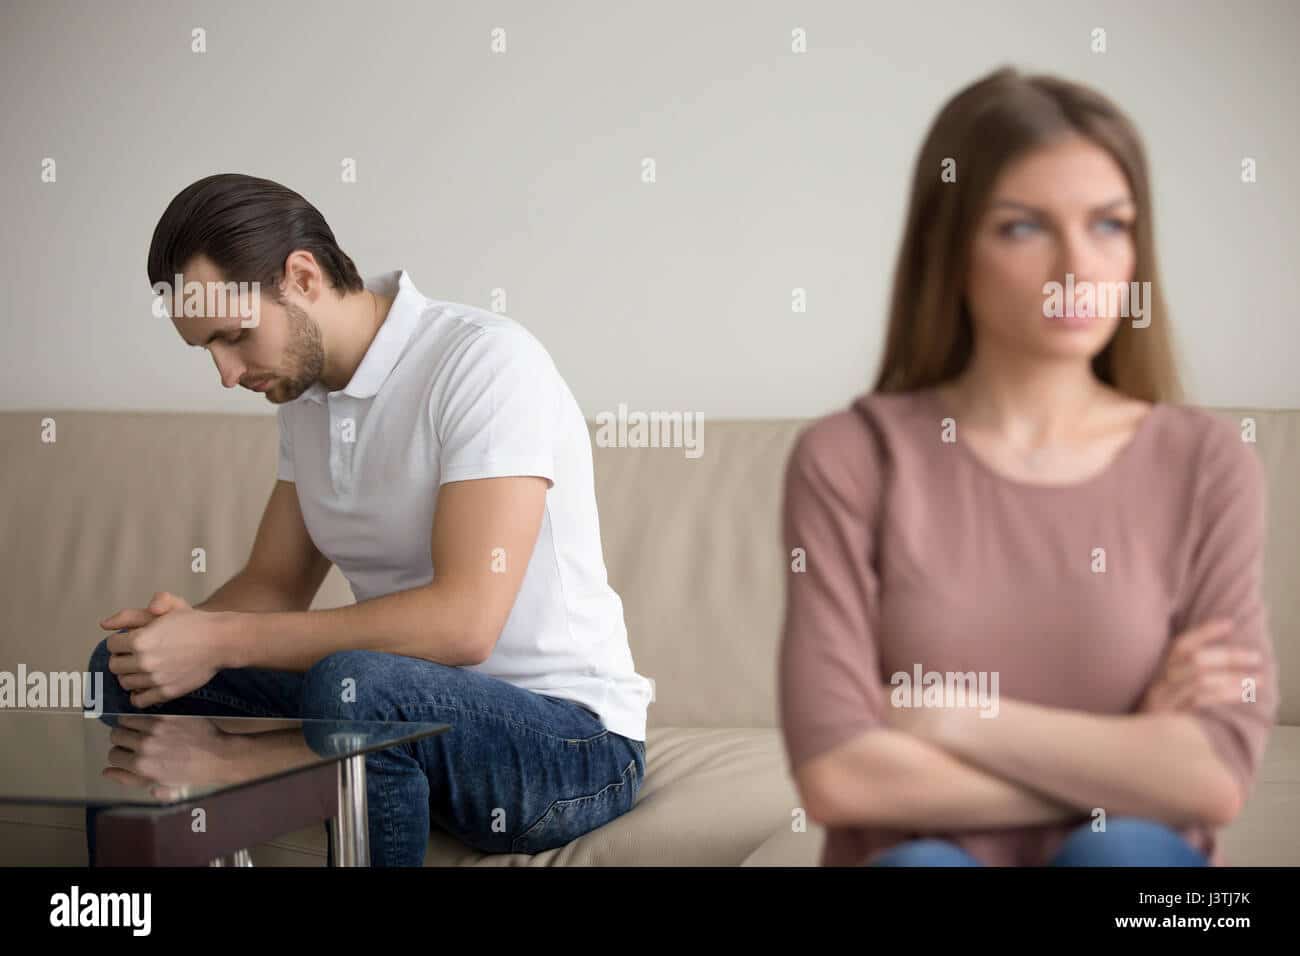 Cheating Wife Stock Photos &  Cheating Wife Stock Images